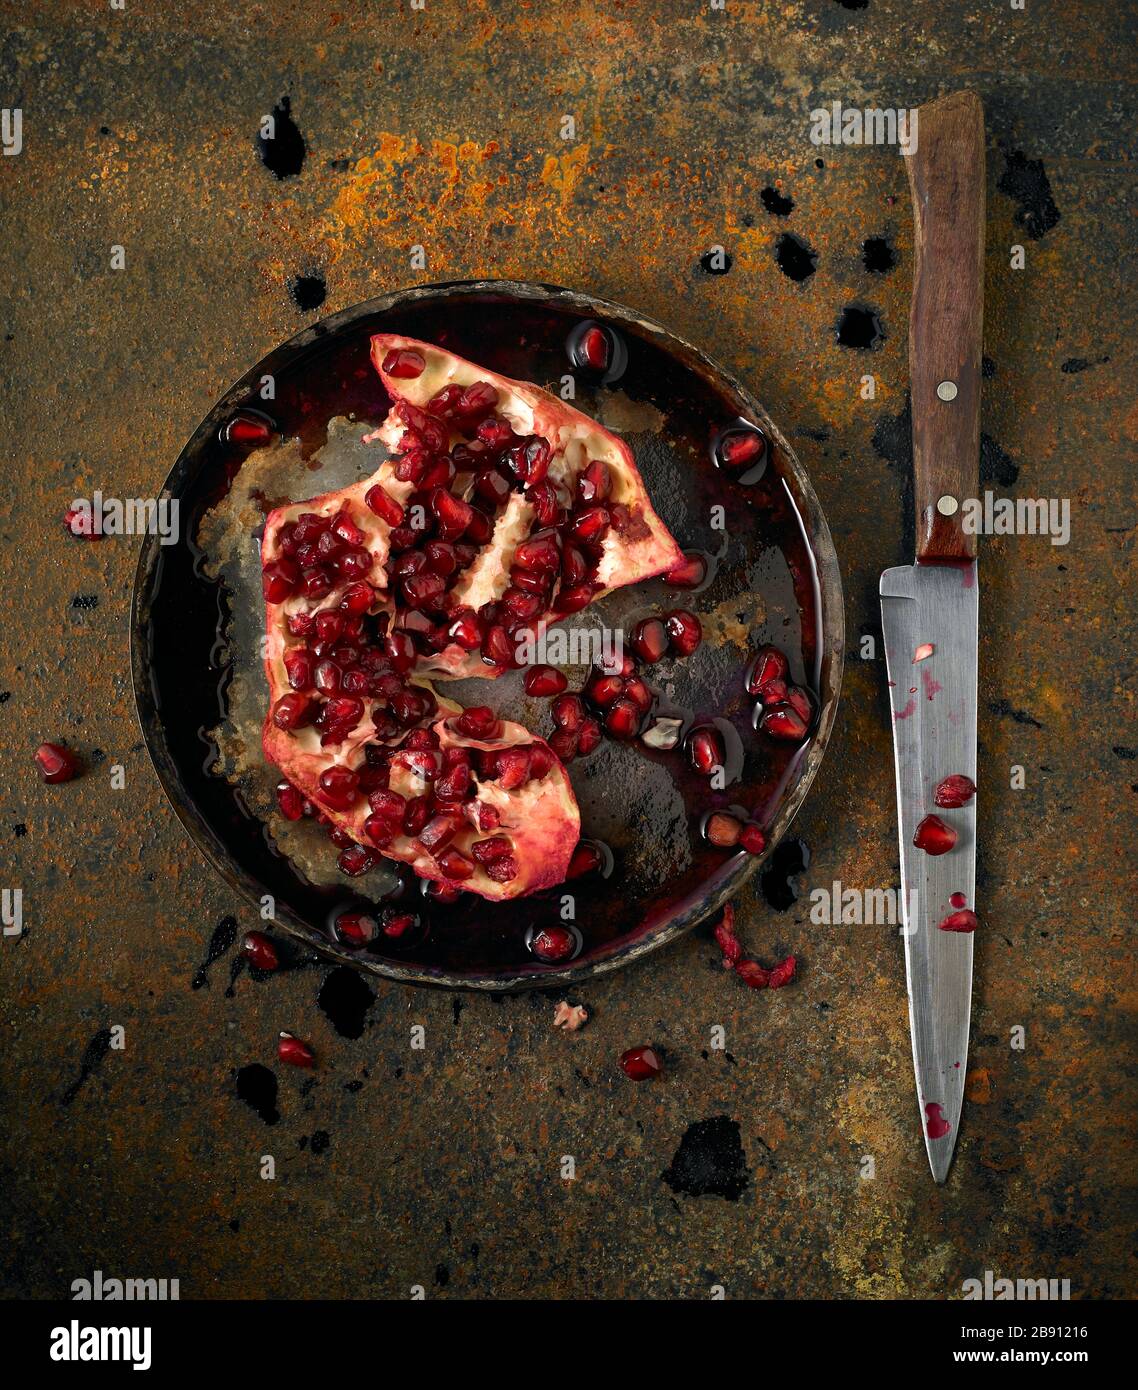 Overhead image of a split pomegranate on a metal plate with a knife on a rusty metal background Stock Photo